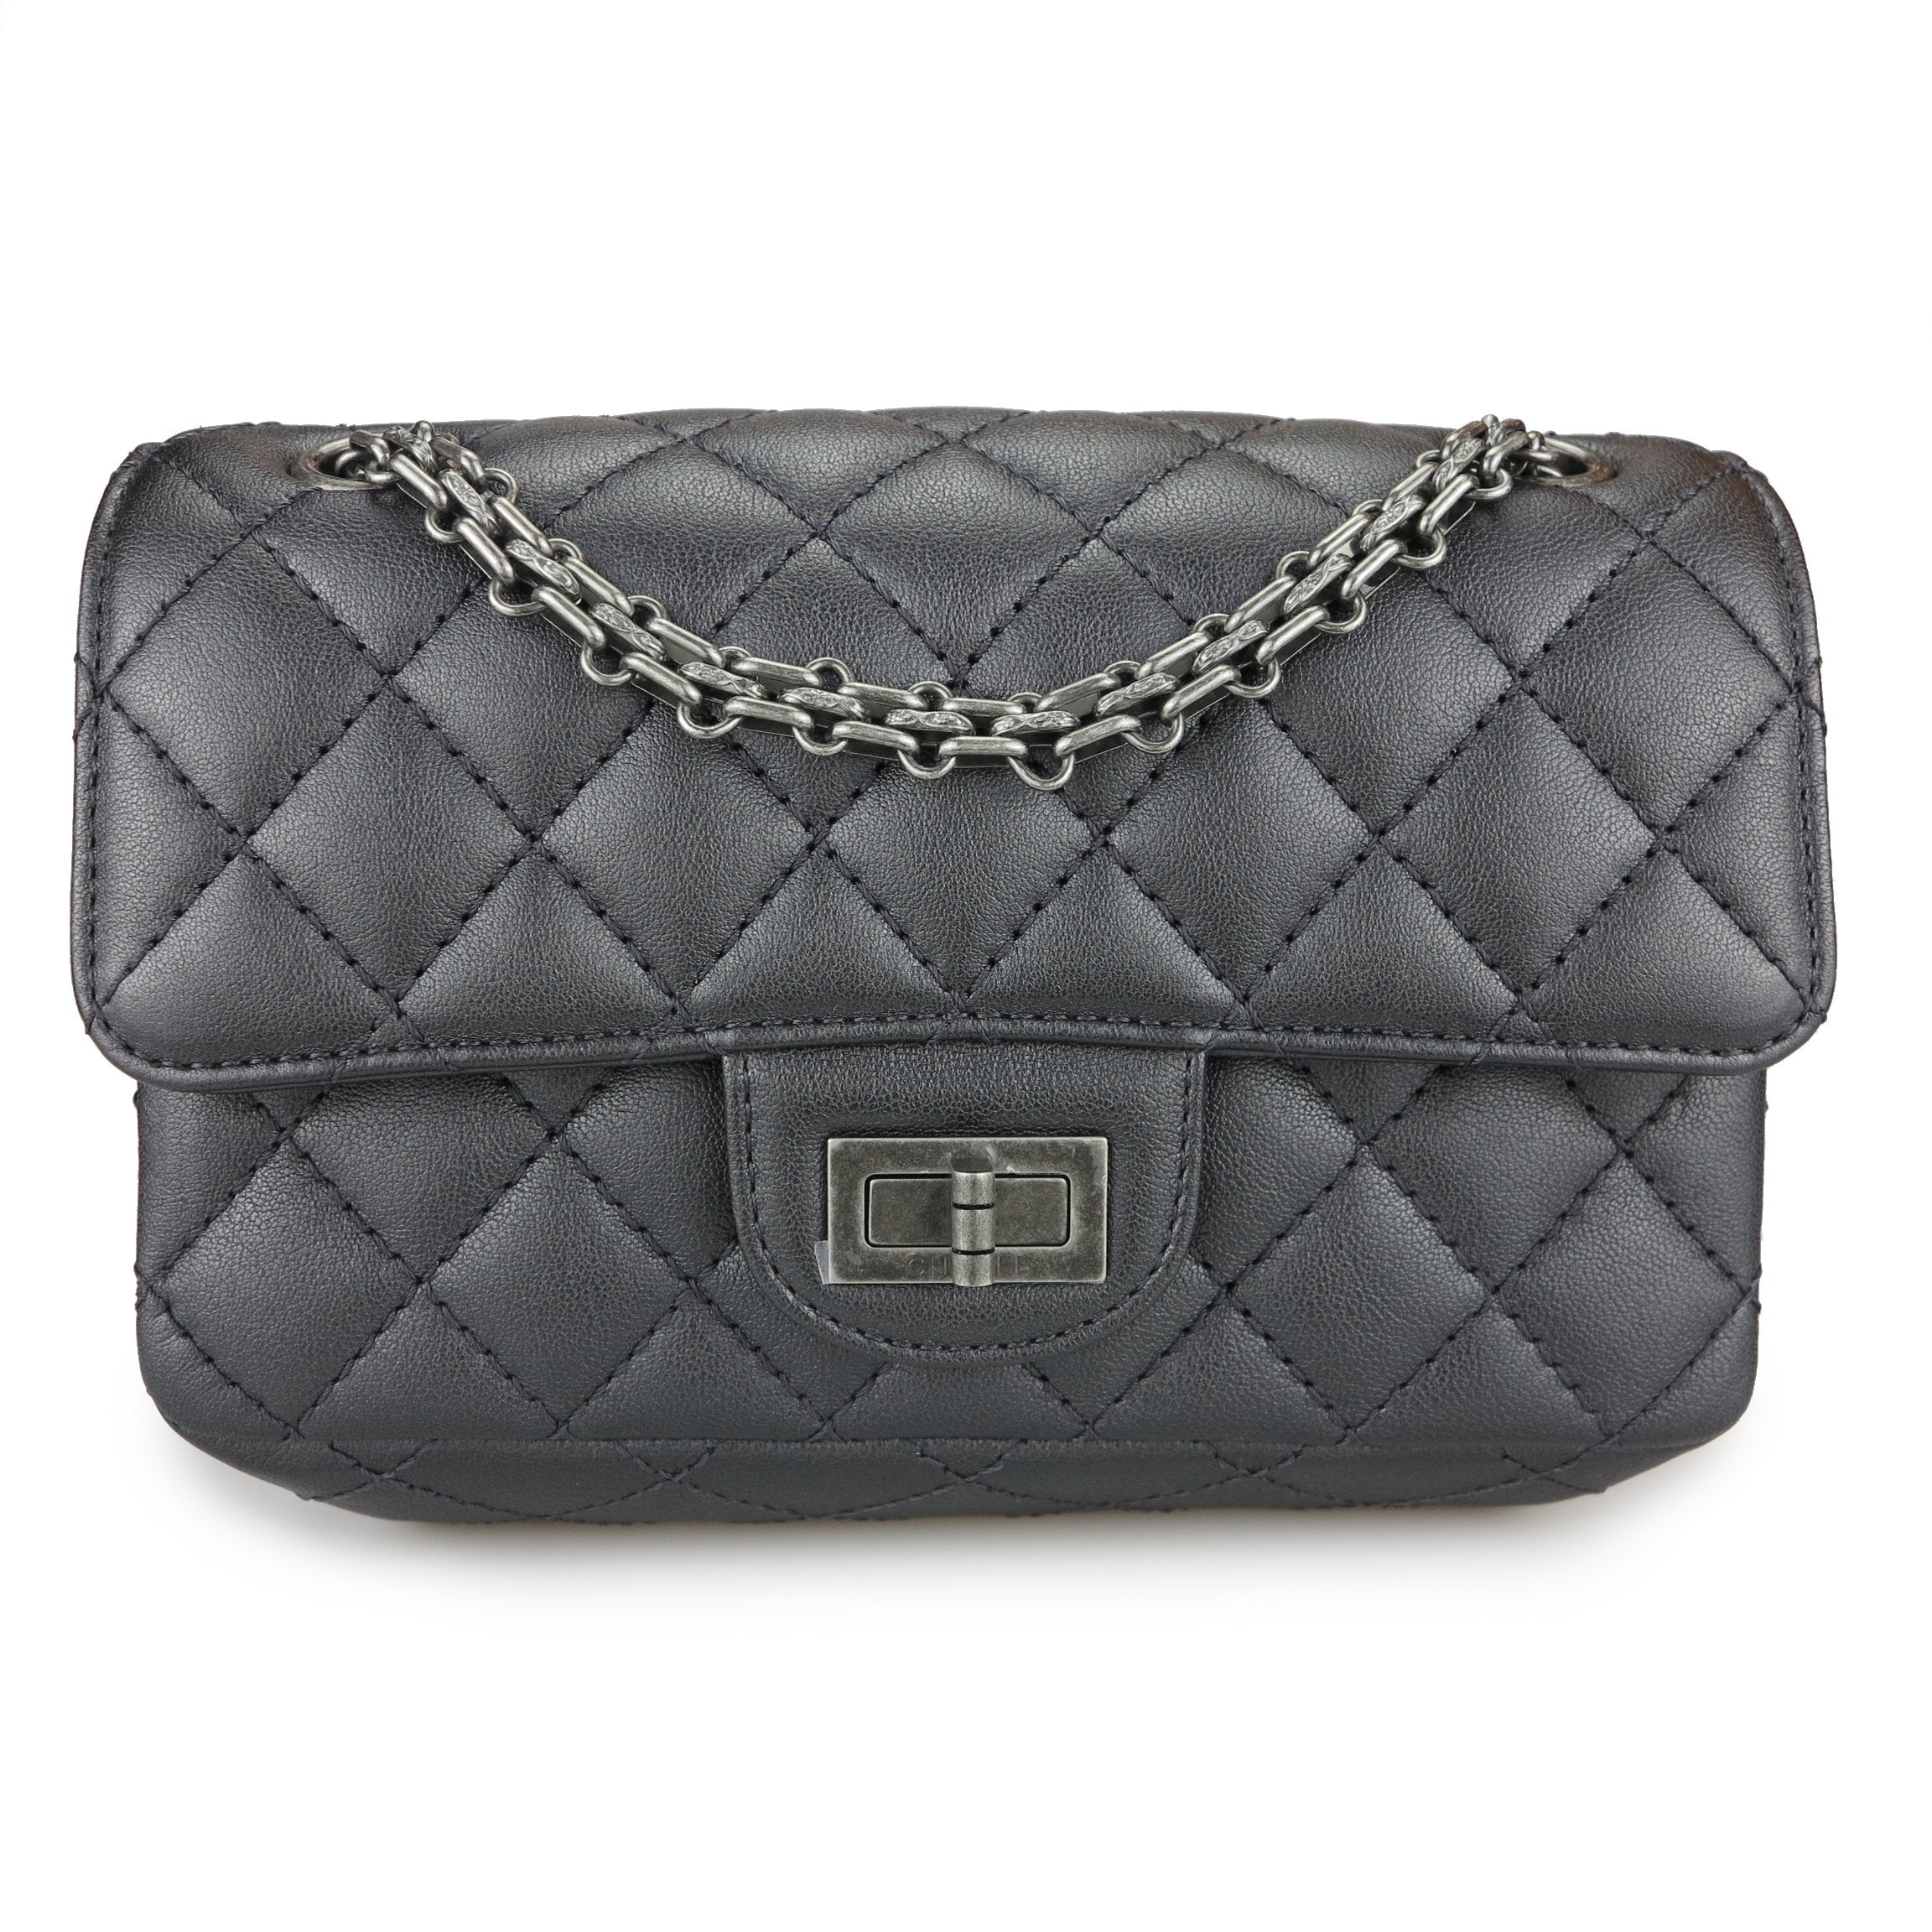 CHANEL 2.55 Mini Reissue Flap Bag Size 224 in Charcoal Grey